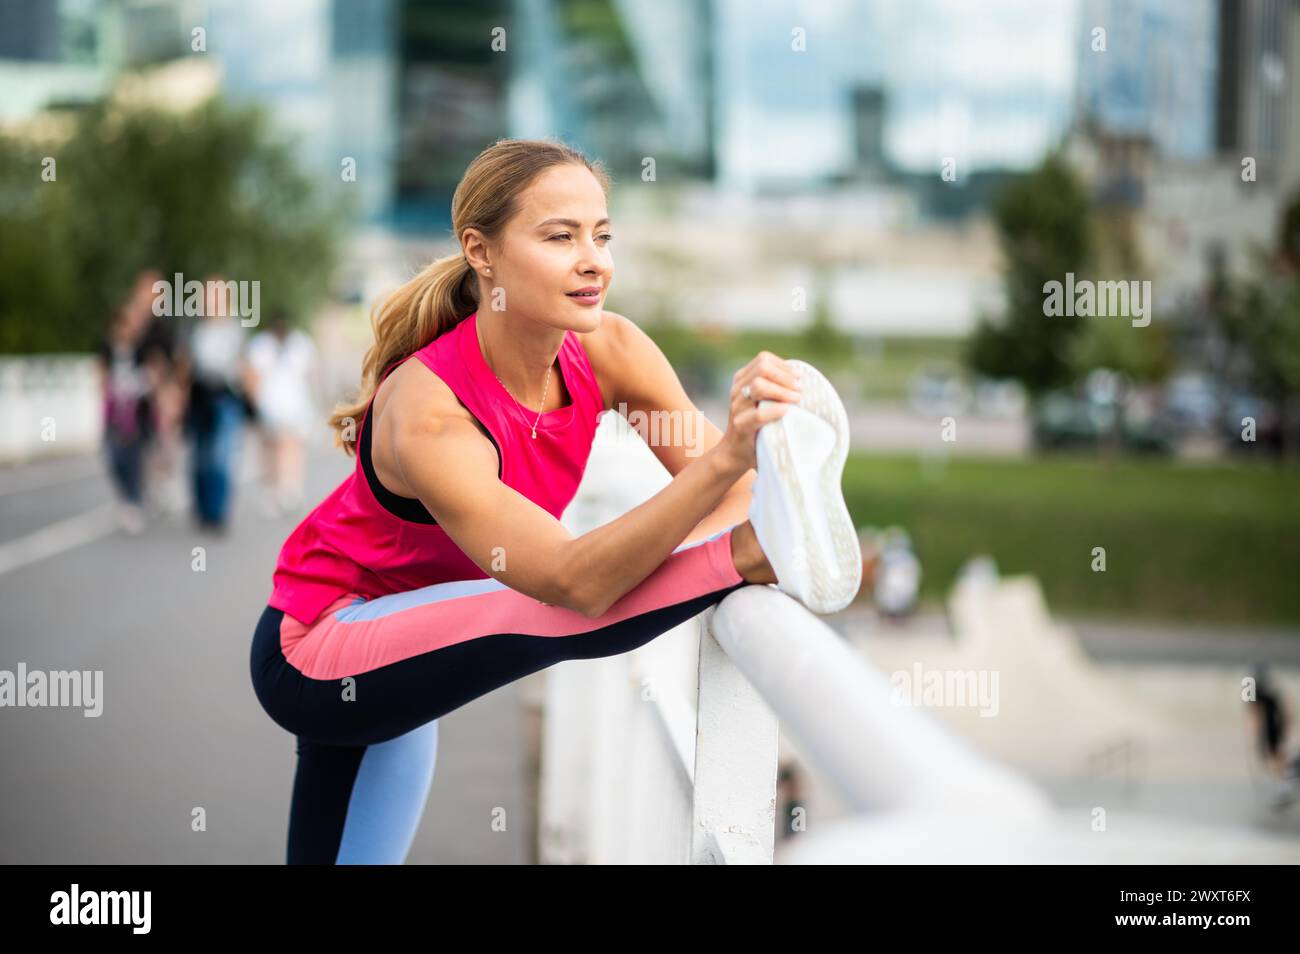 Young female runner stretching on a bridge in an urban setting Stock Photo